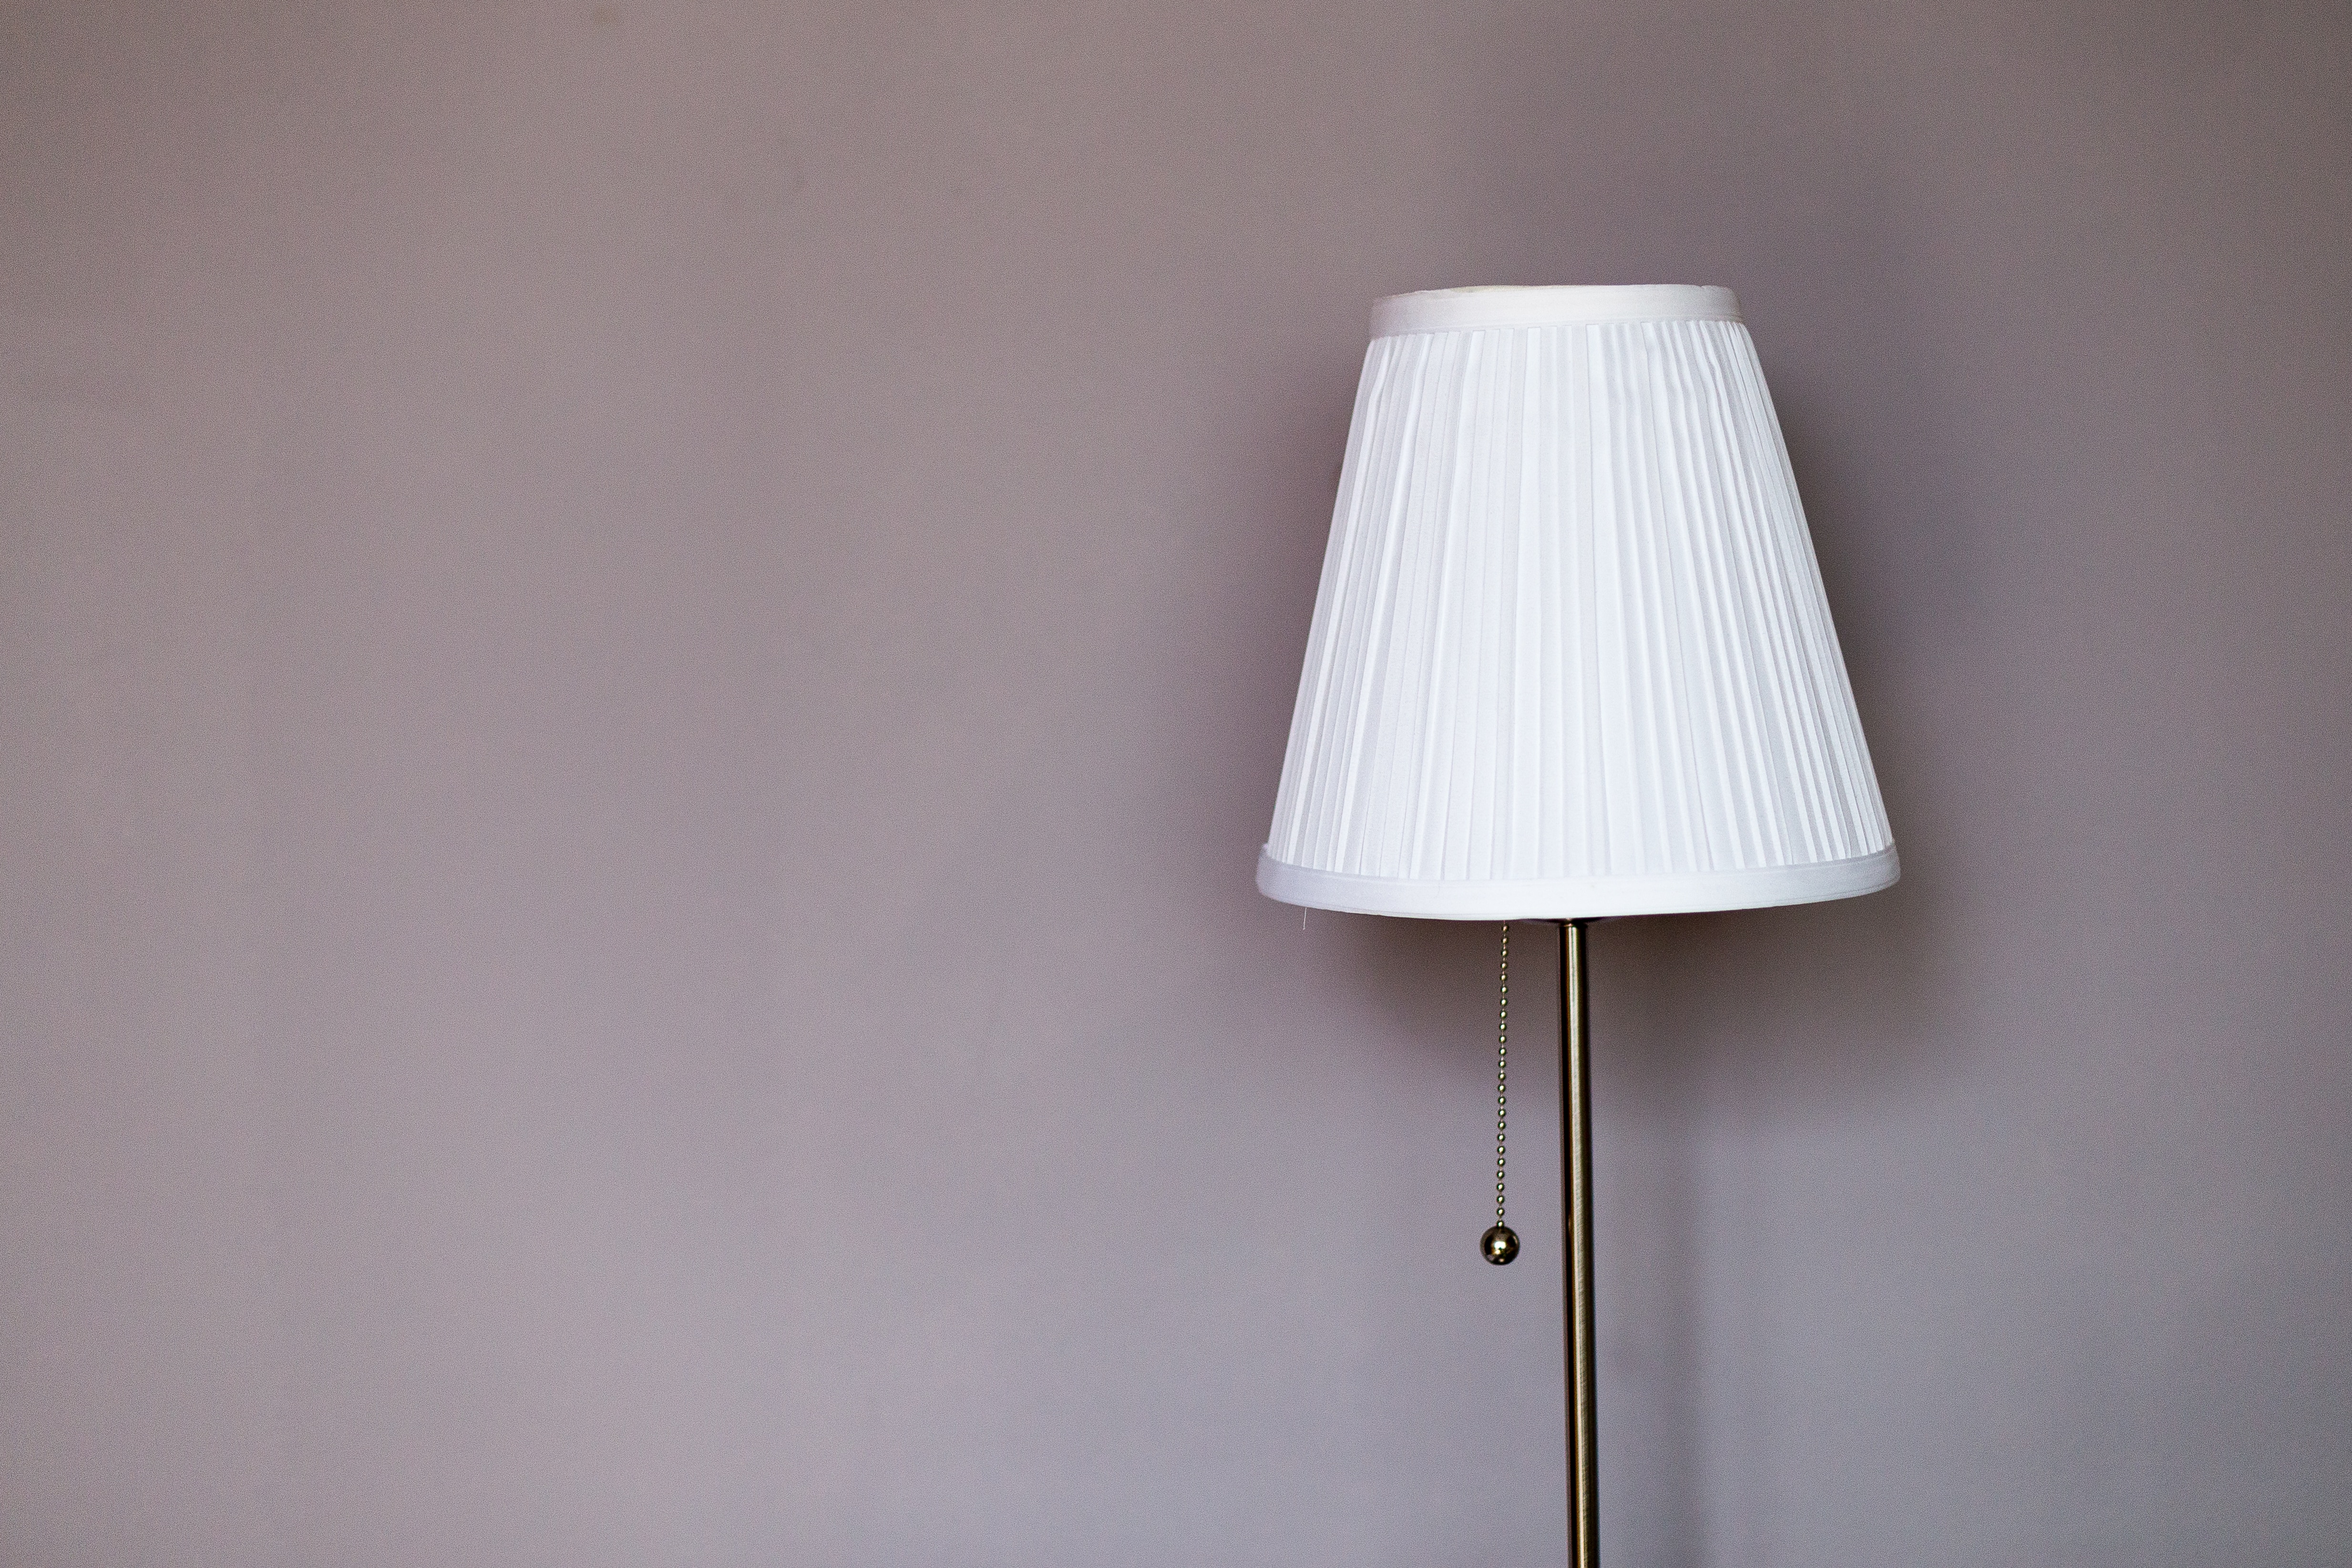 turned off floor lamp with white lampshade